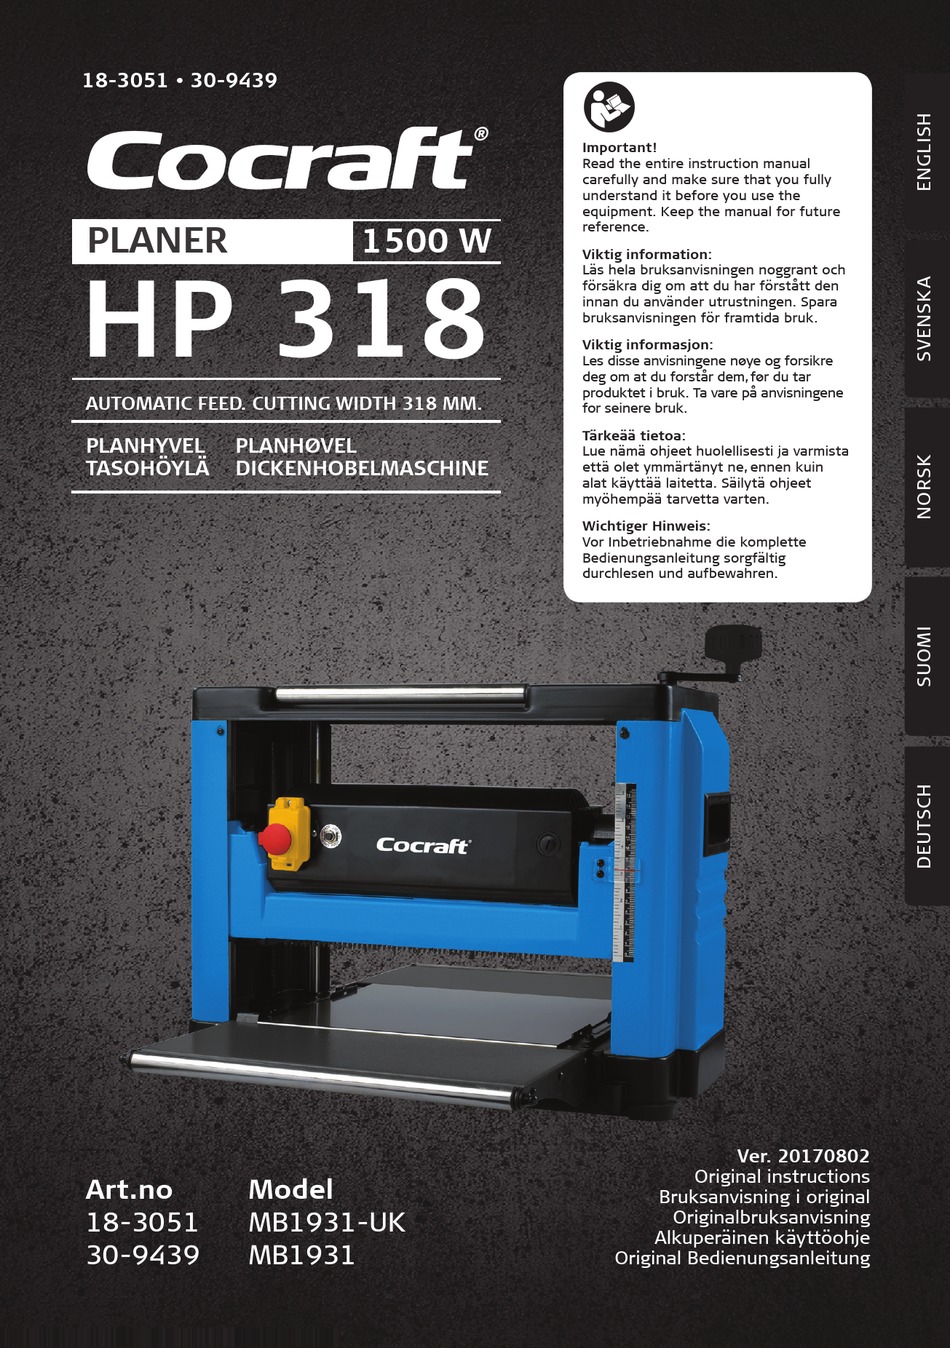 Image of Cocraft HP 318 planing machine